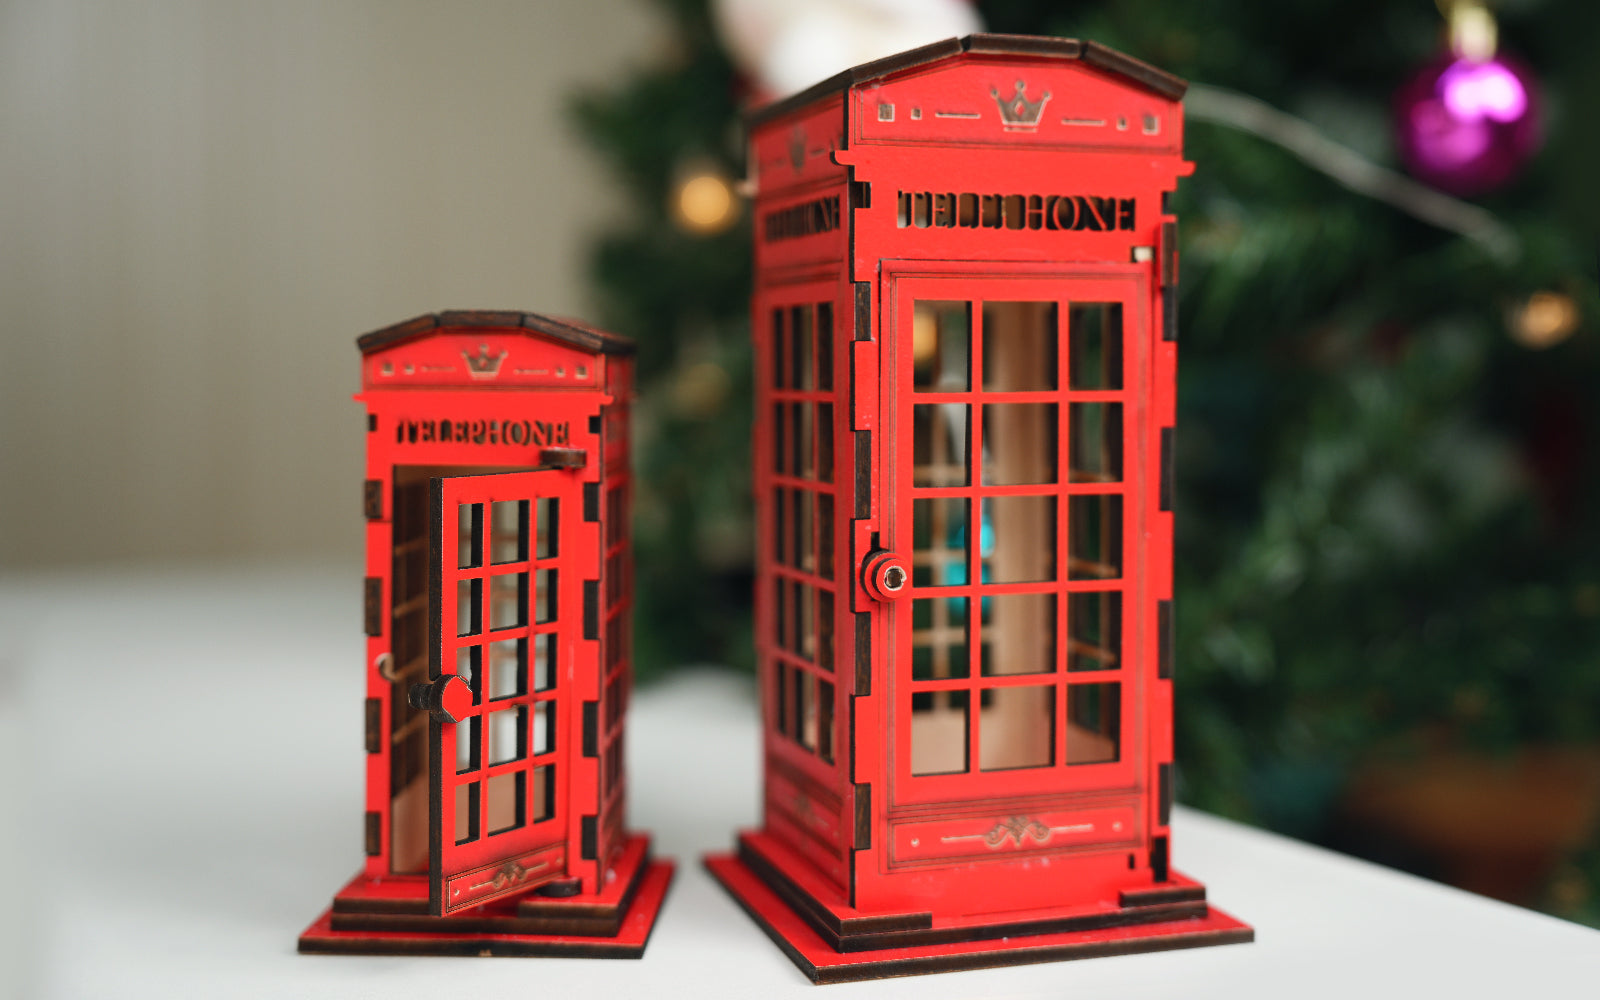 3D Telephone Booth